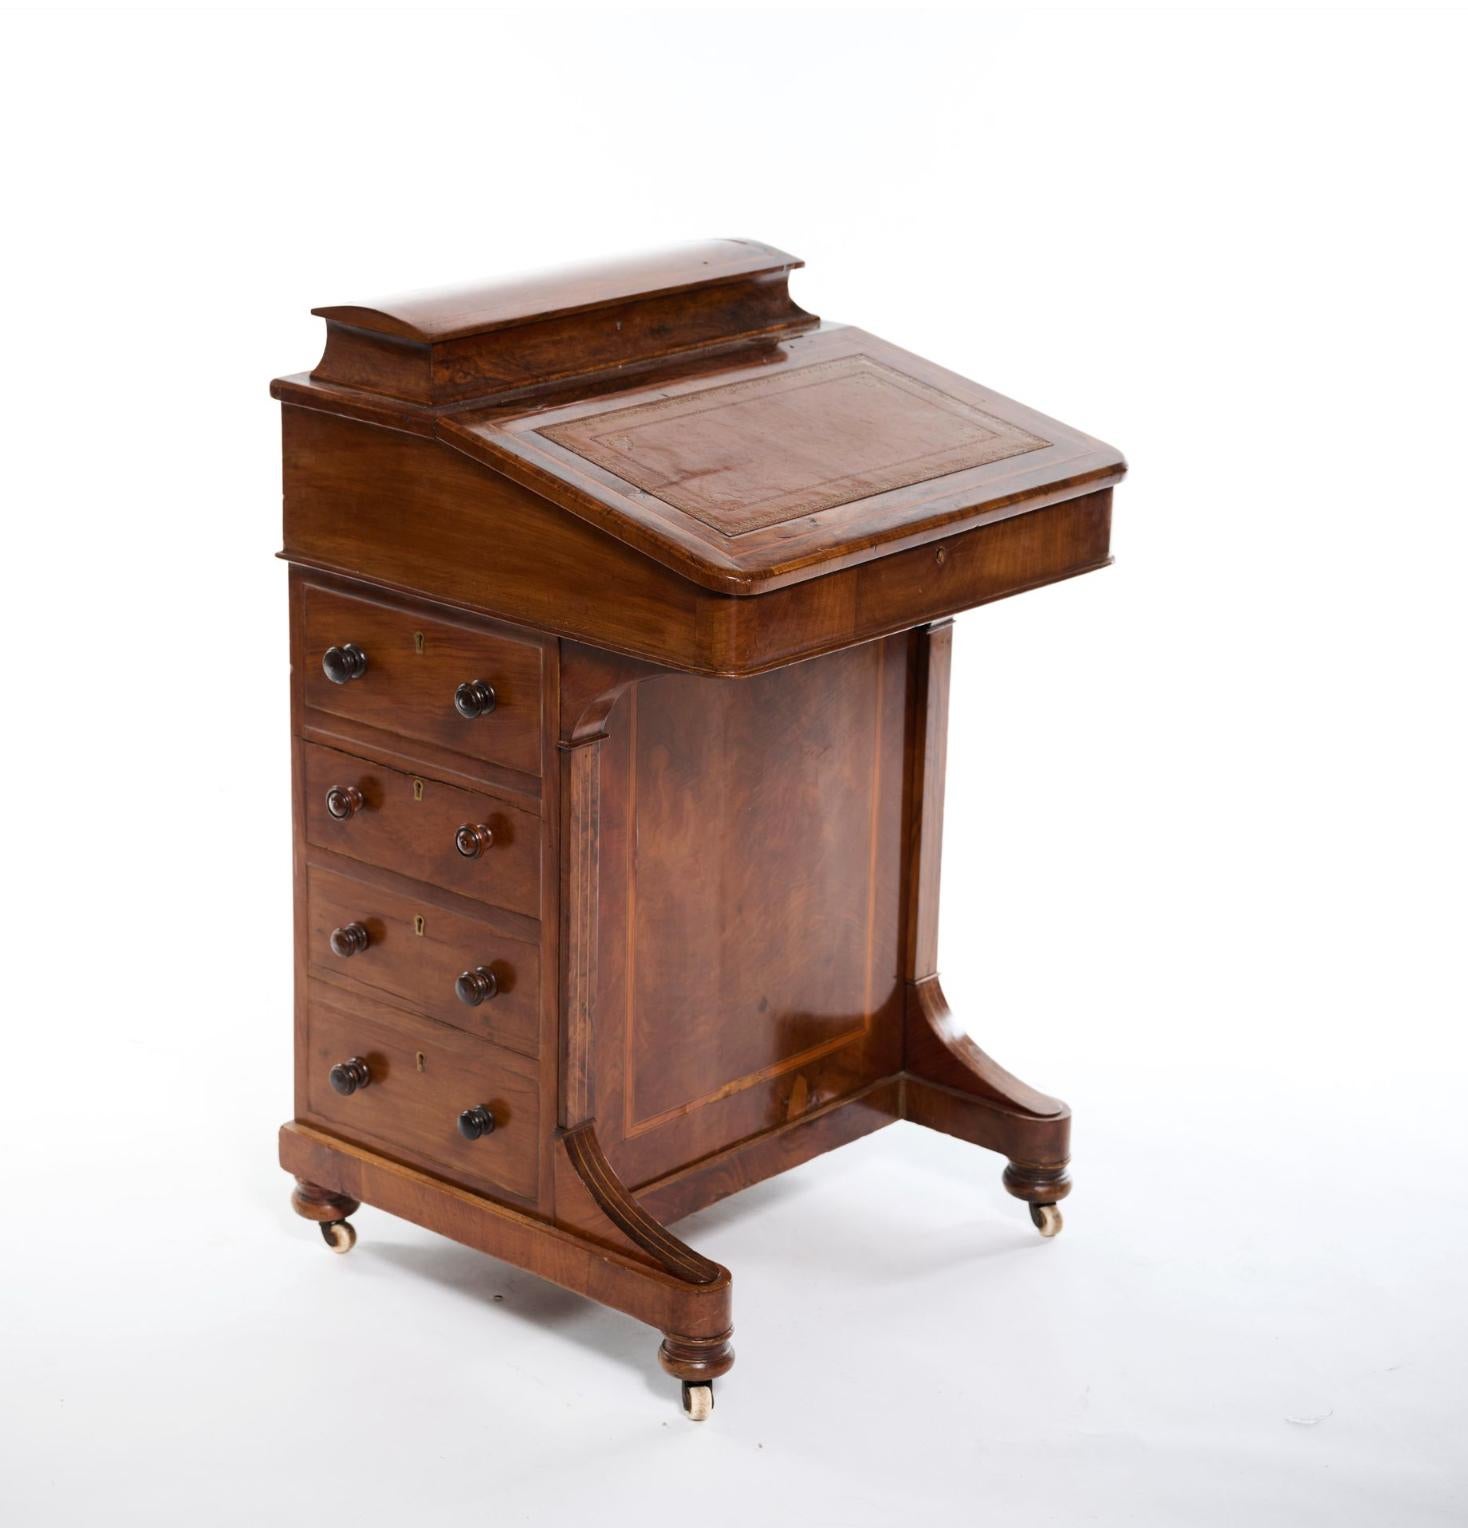 Hand-Carved 19th Century Hand Carved Walnut Davenport Writing Desk made in England For Sale